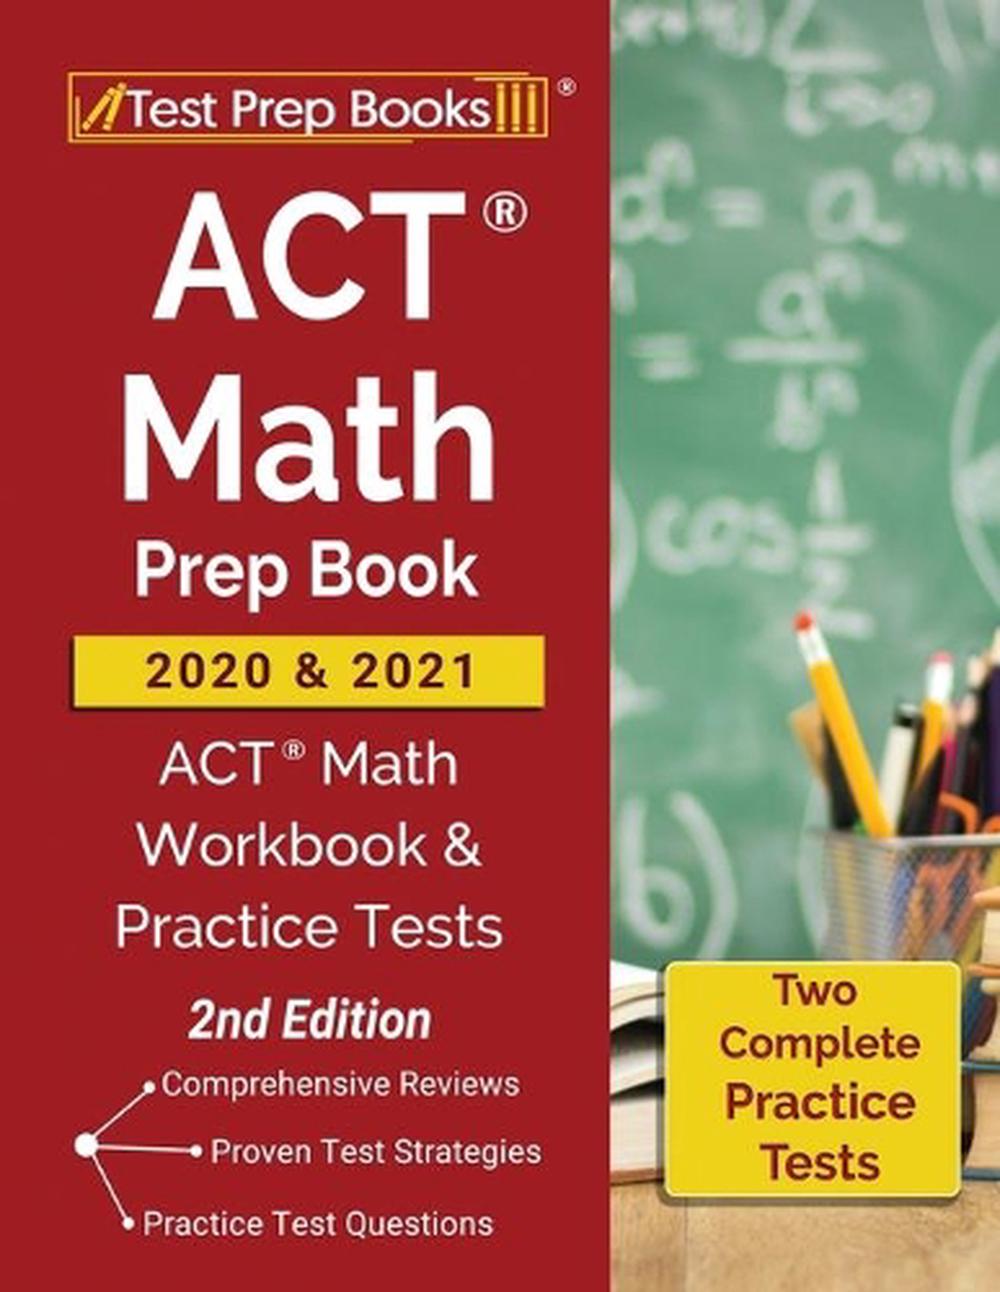 act-math-prep-book-2020-and-2021-act-math-workbook-and-practice-tests-2nd-edit-9781628459579